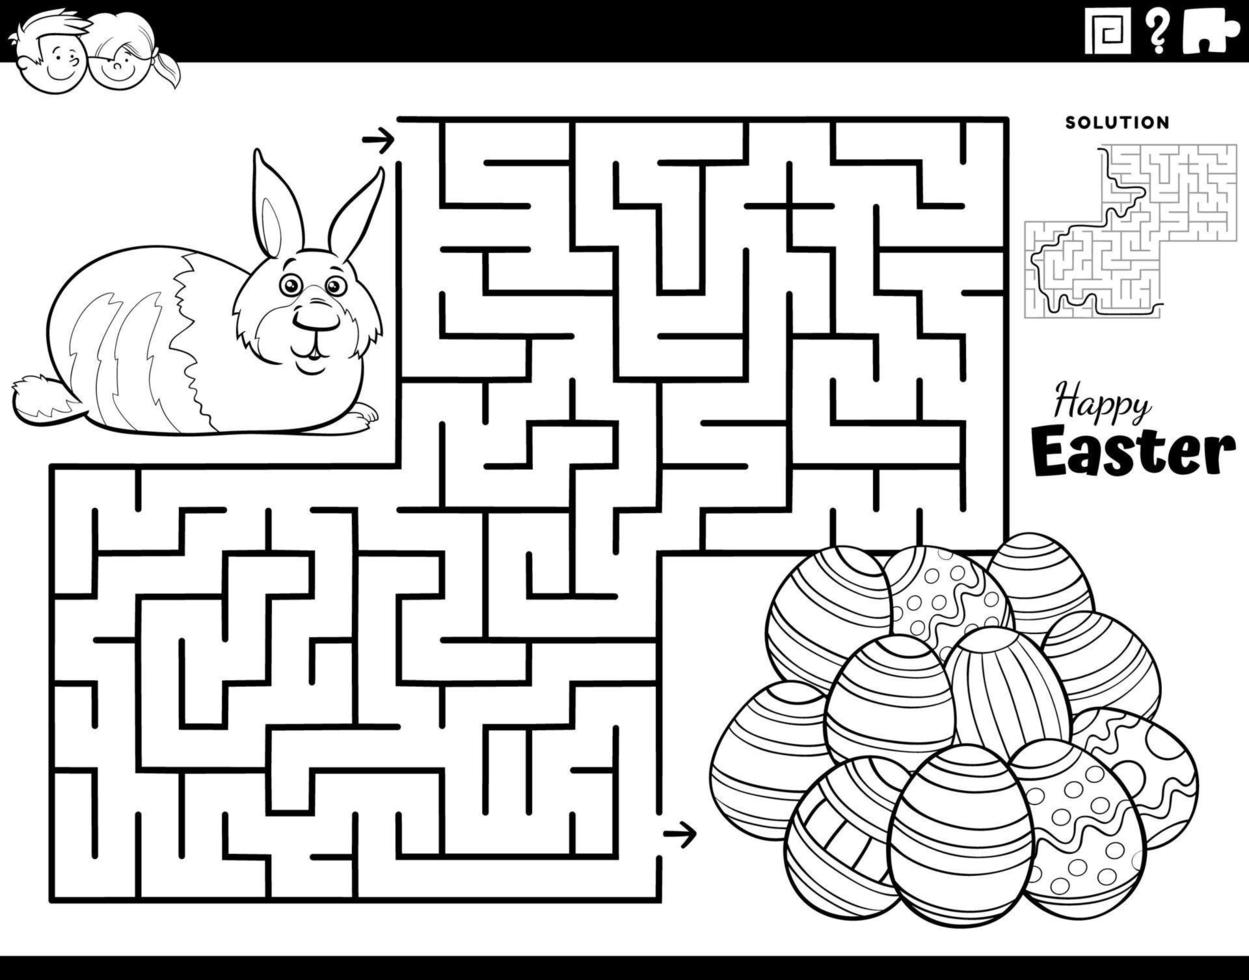 maze with Easter Bunny and Easter eggs coloring page vector